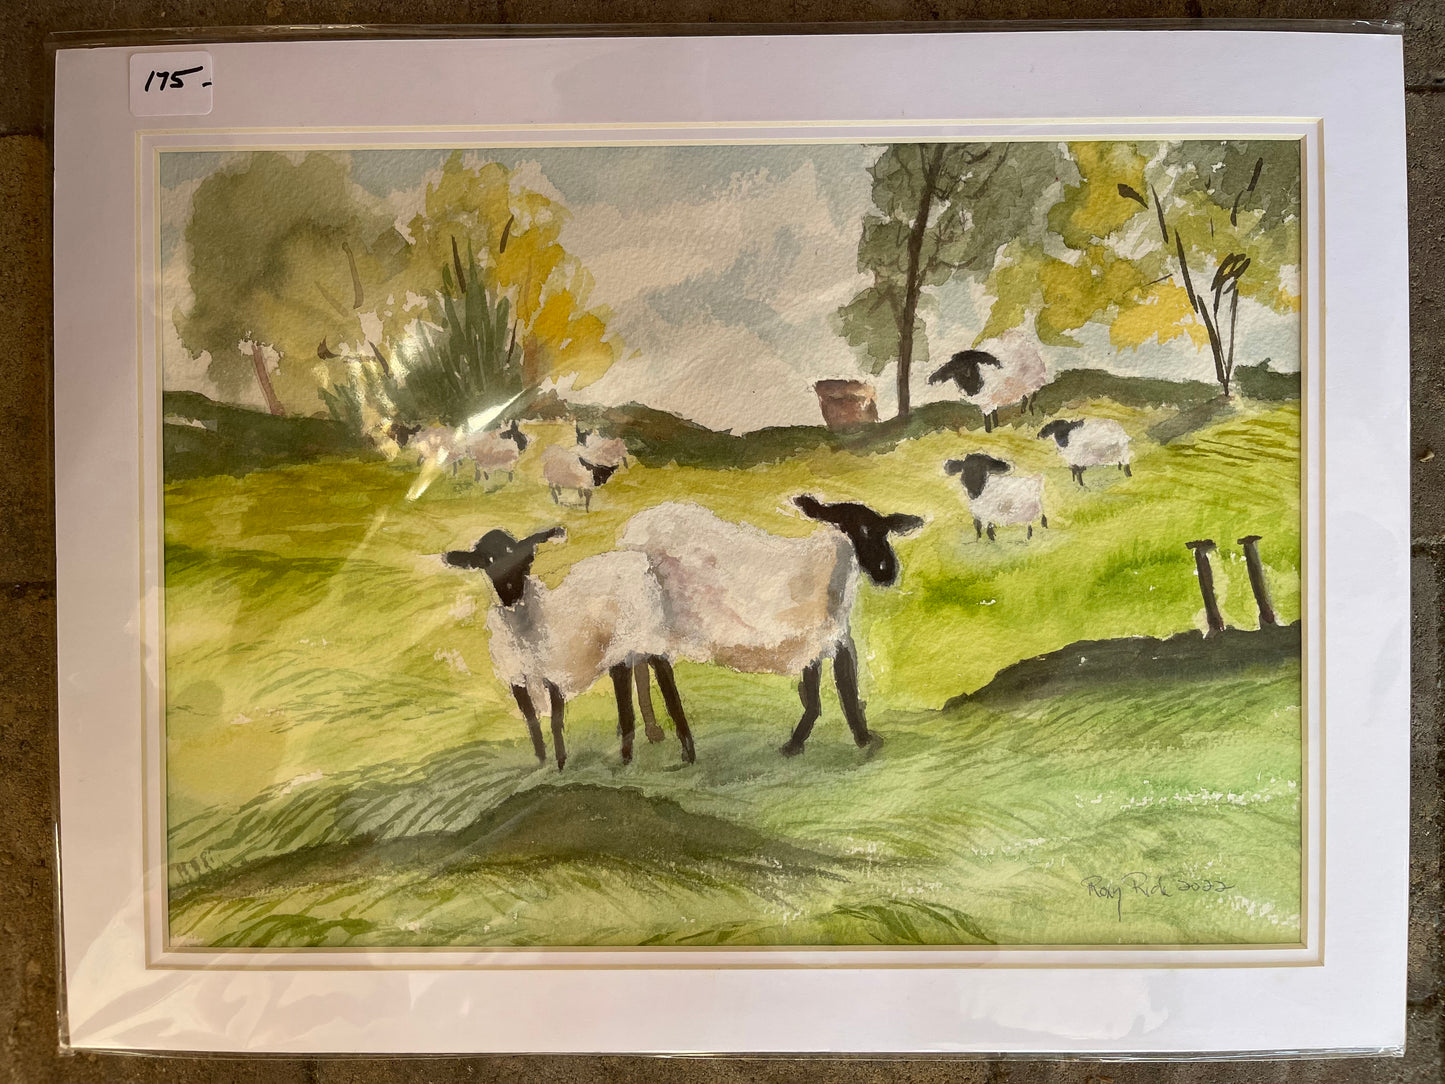 English Countryside with Sheep Original Watercolor Painting